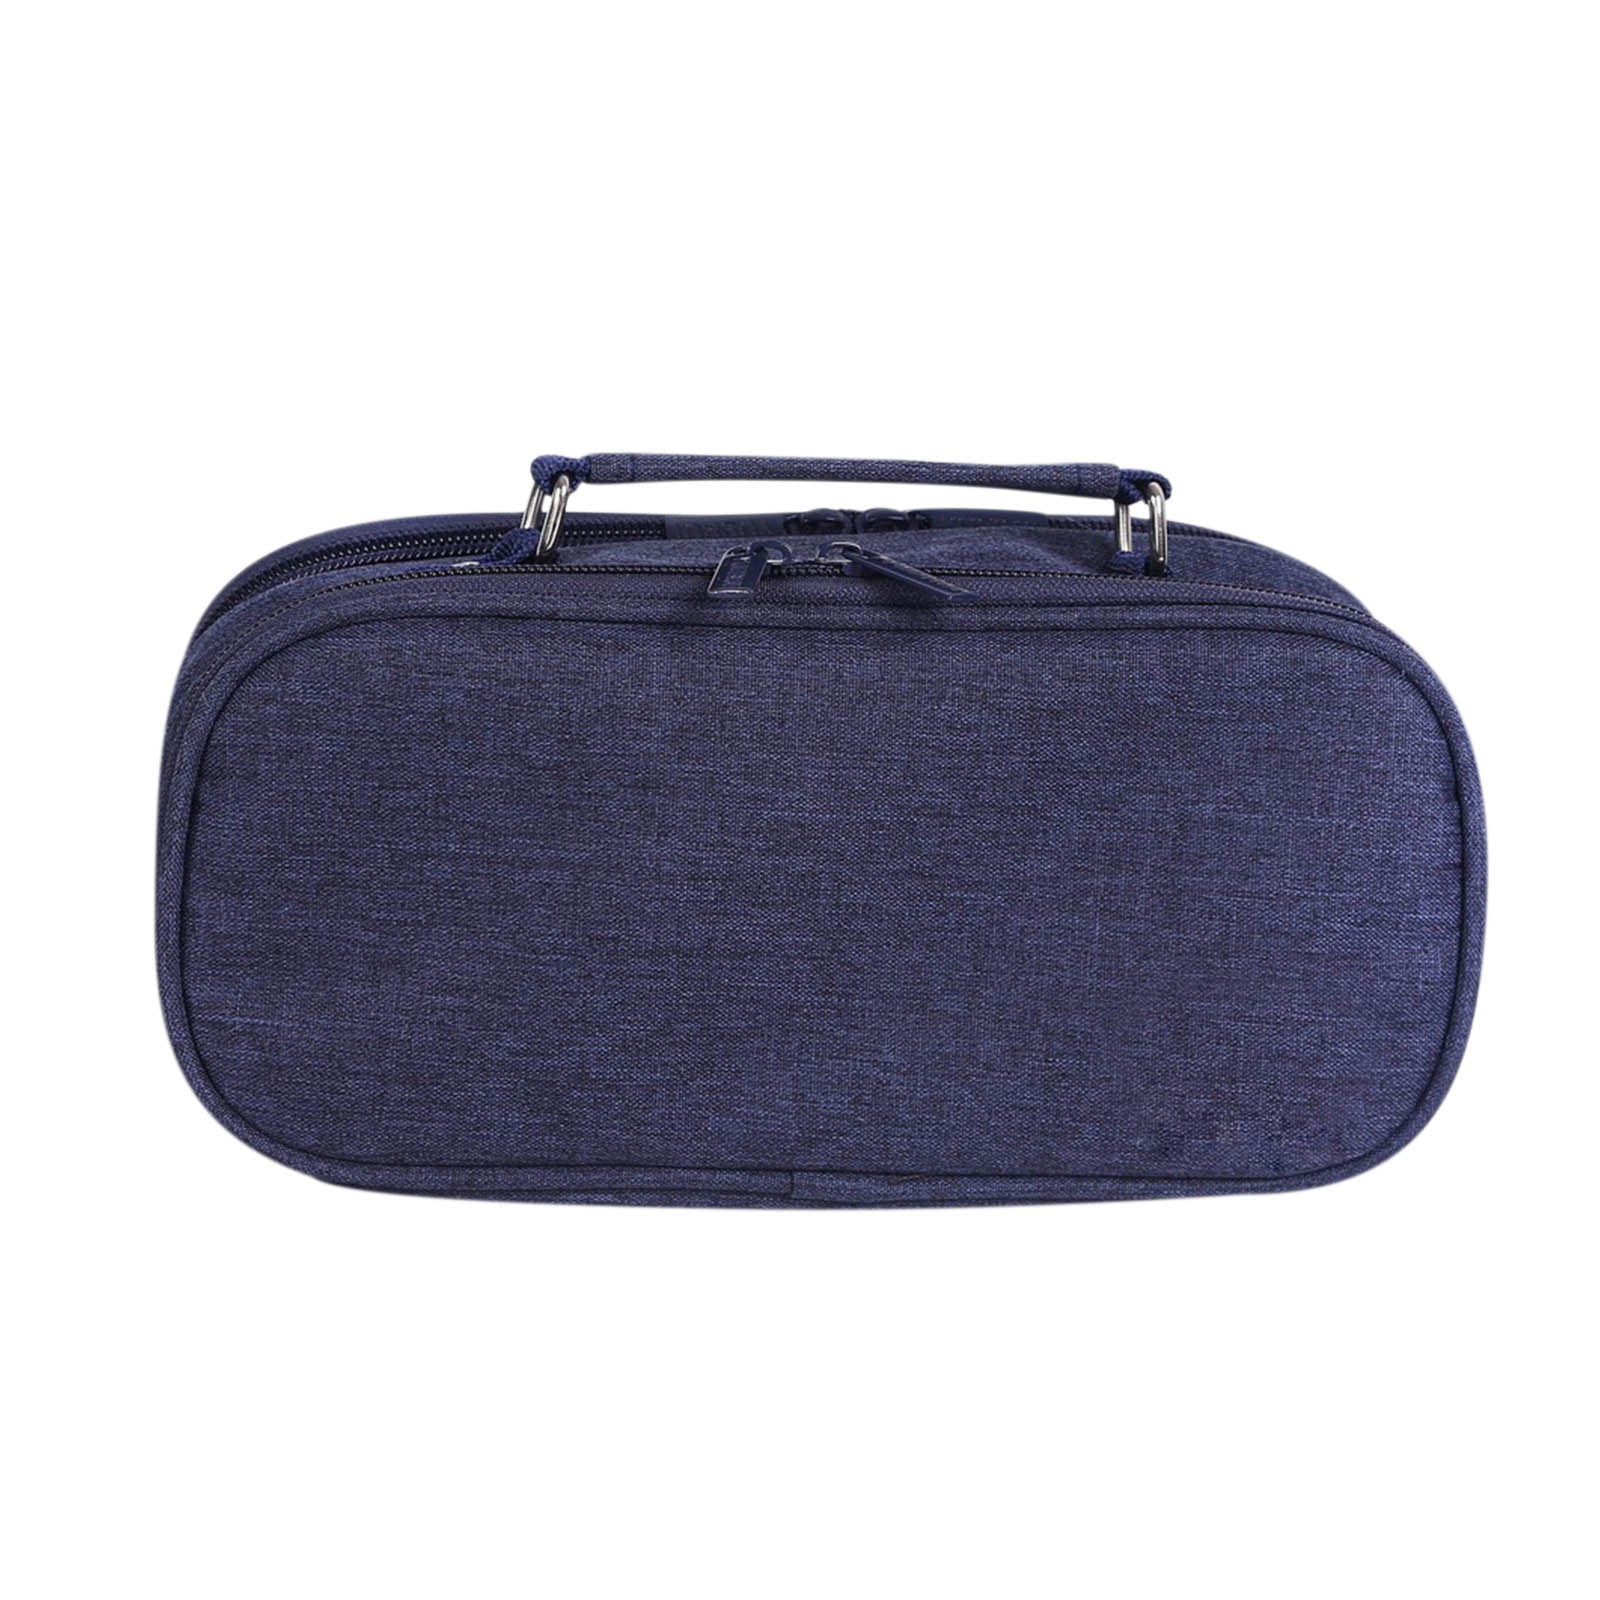 Wholesale double pencil case with compartments For Your Pencil